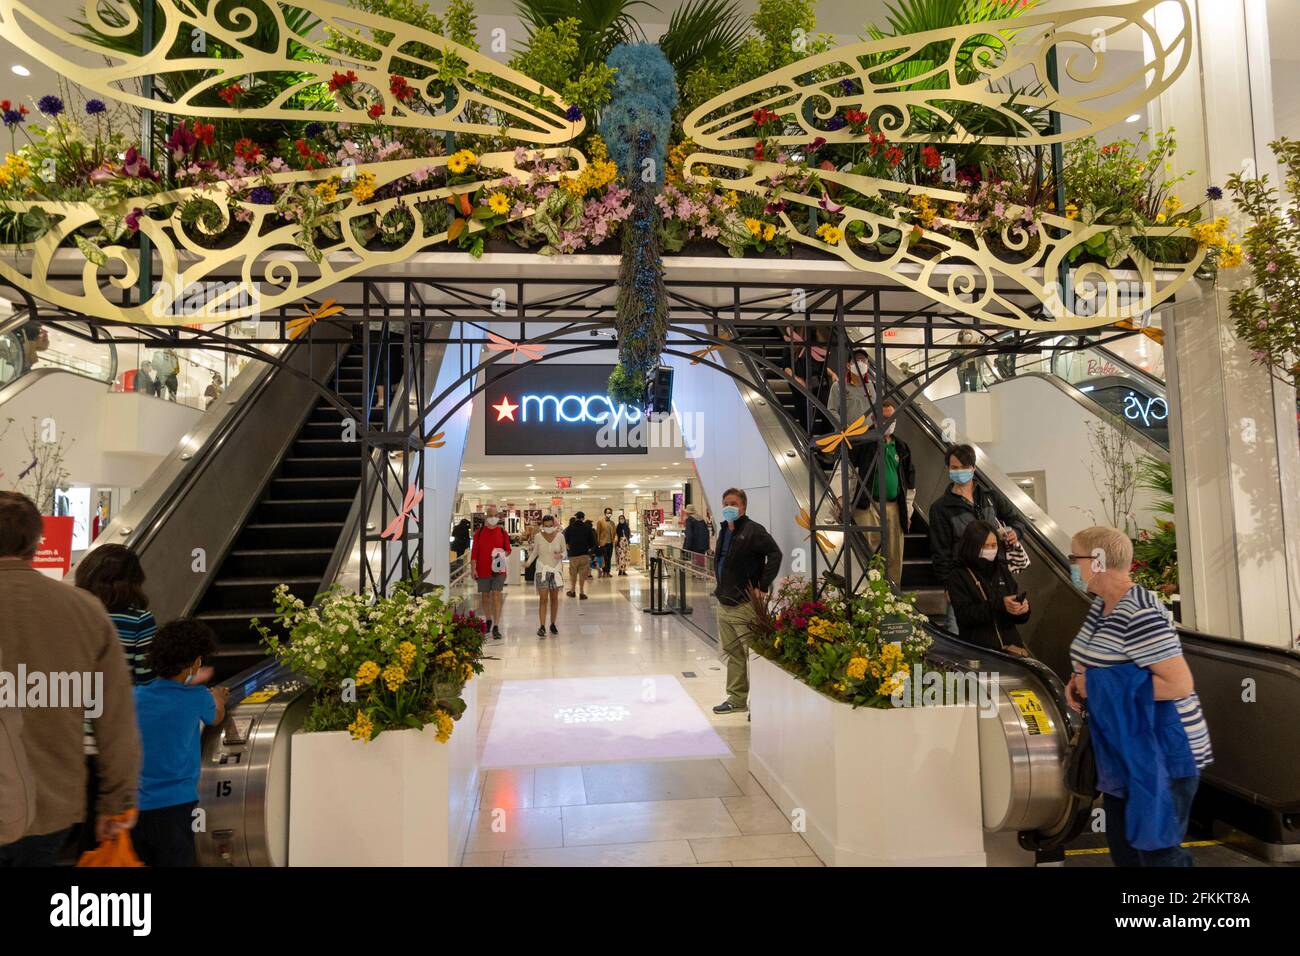 Macy's Annual Flower Show with 'Floral Celebration of Fortitude' Theme, Herald Square, NYC, USA Stock Photo